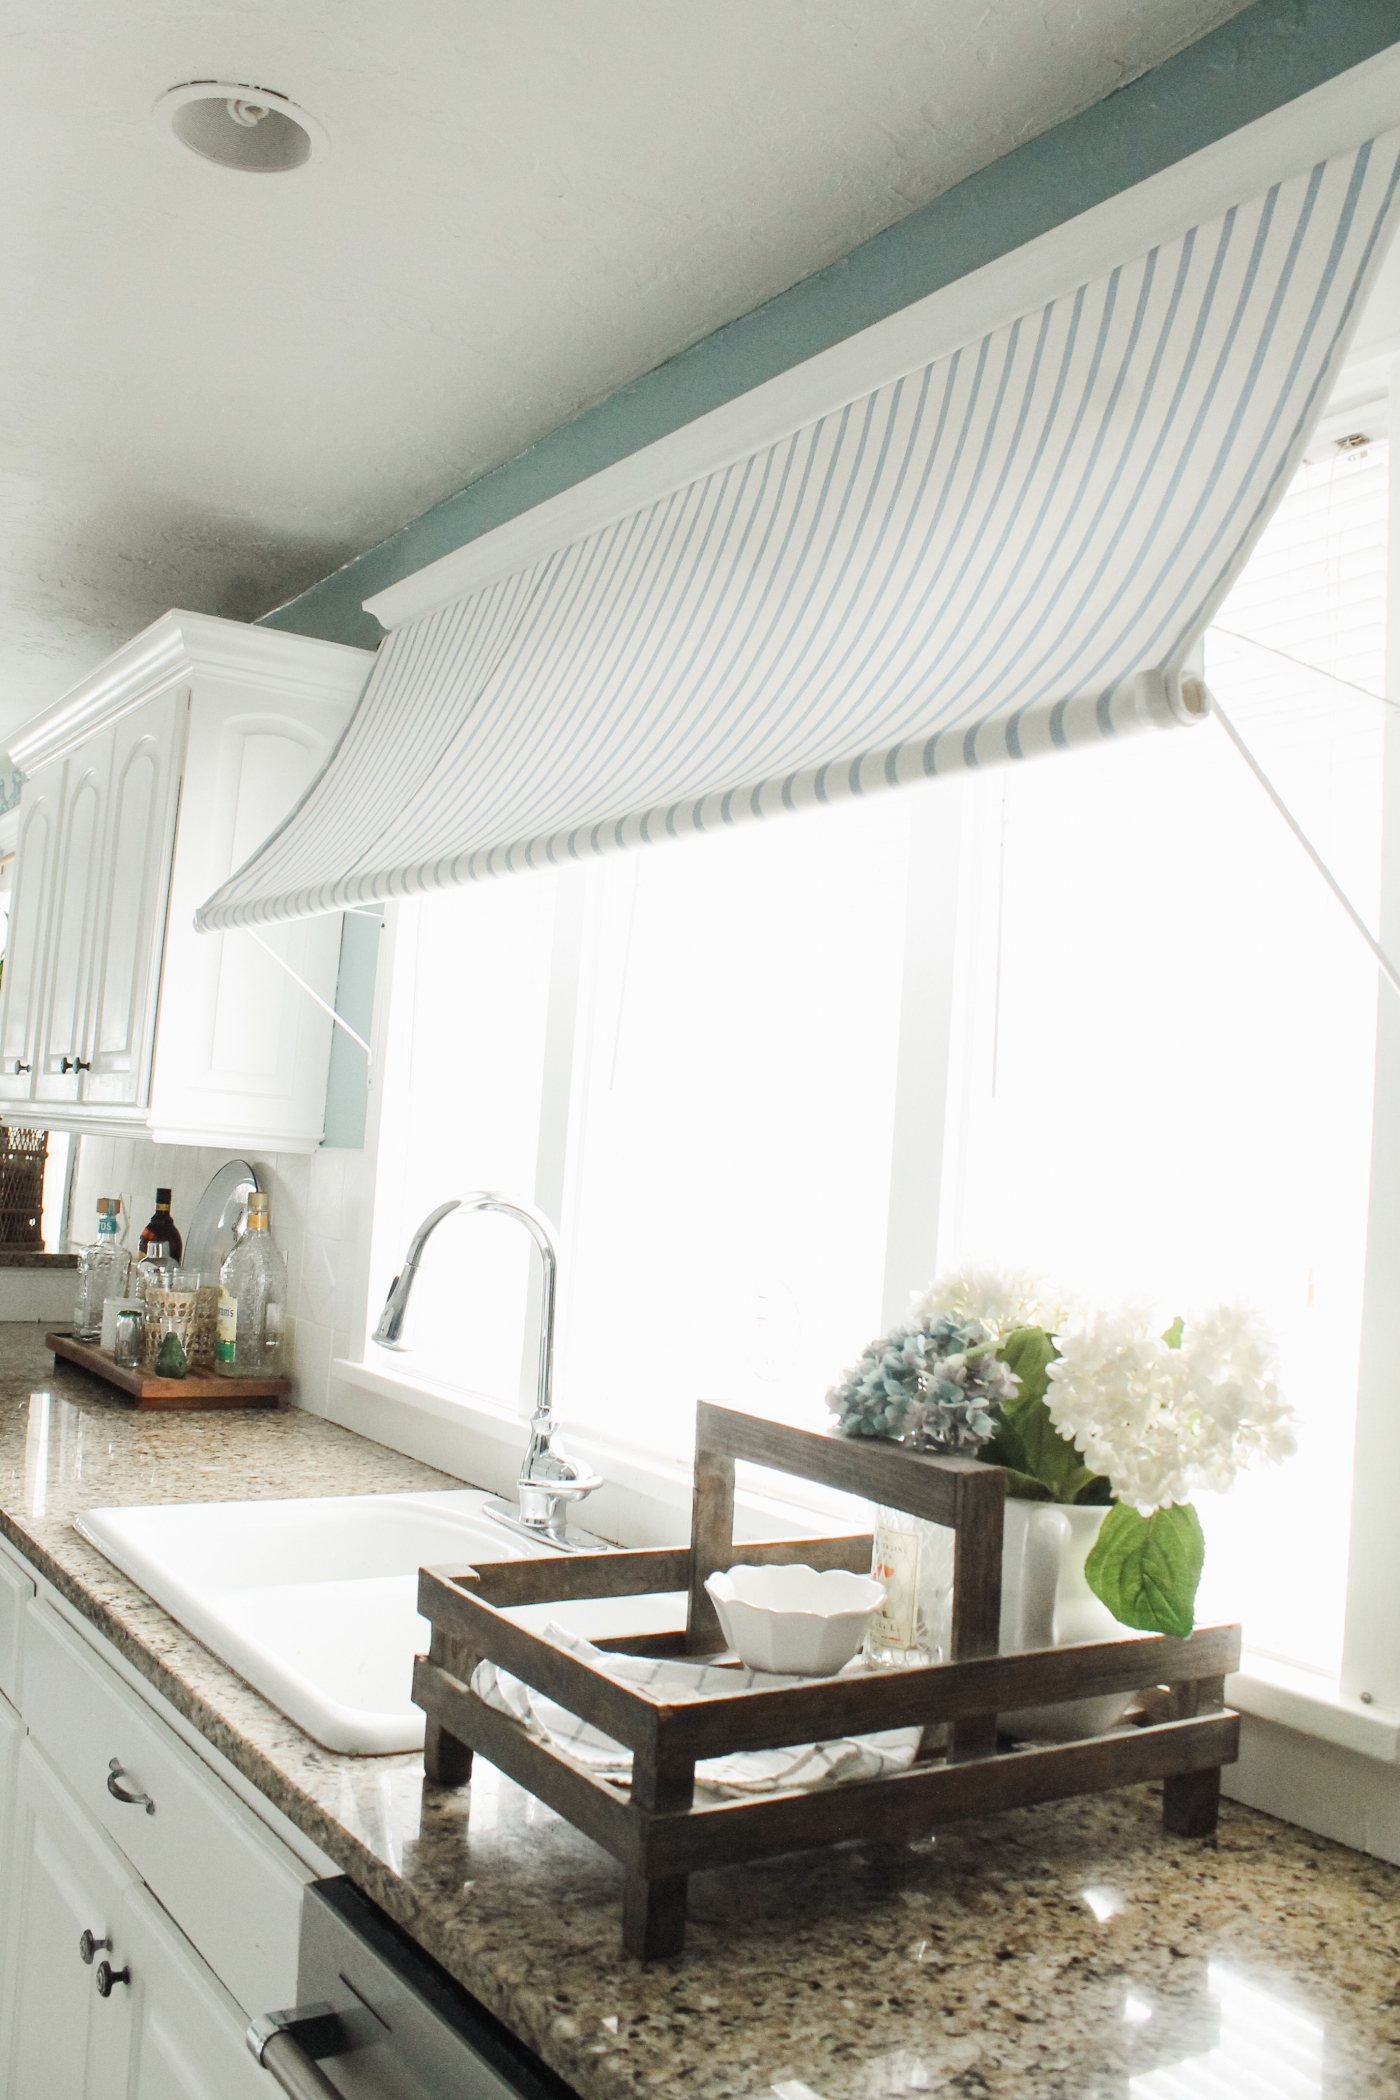 How to make a Window Awning - A fun alternative to a Curtain